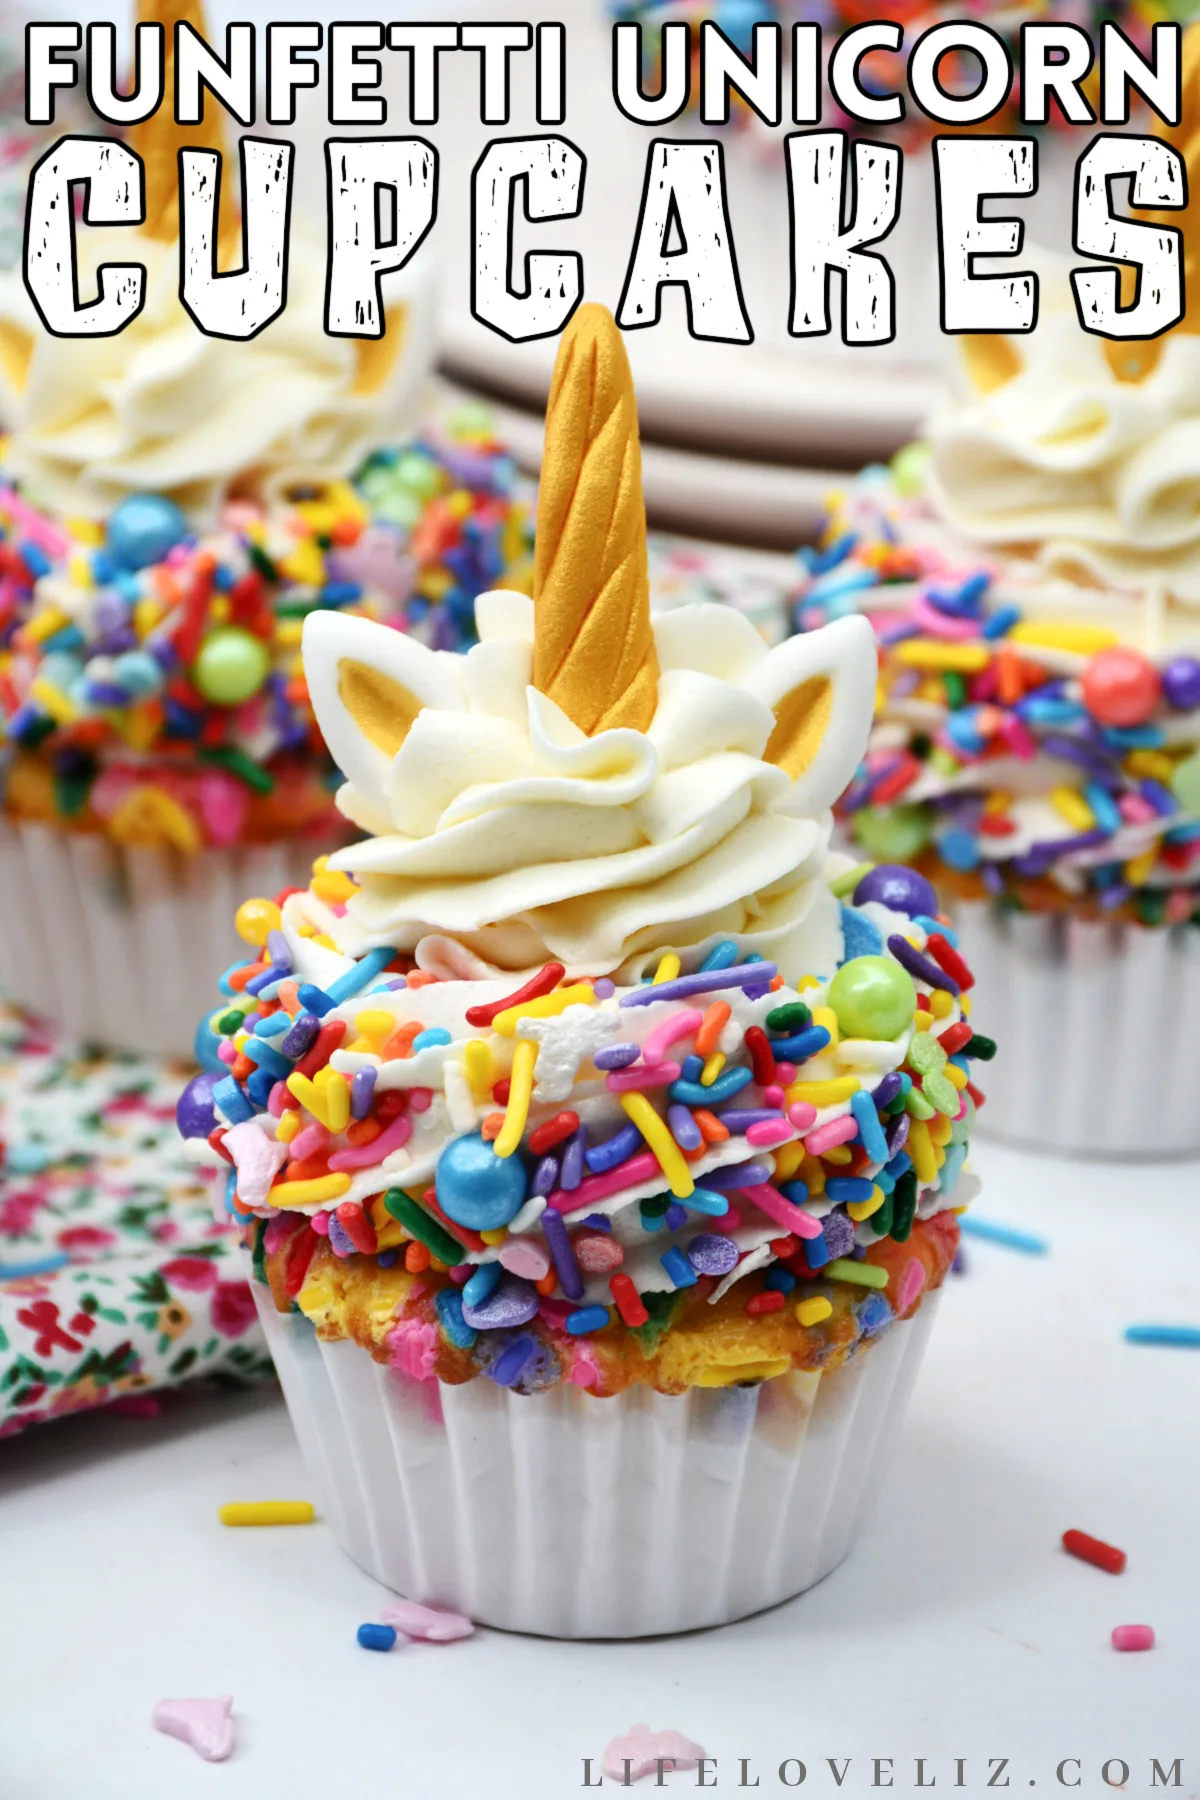 Love unicorns? These cupcakes will make your day! This easy recipe for Unicorn Funfetti Cupcakes is perfect for parties and special occasions.